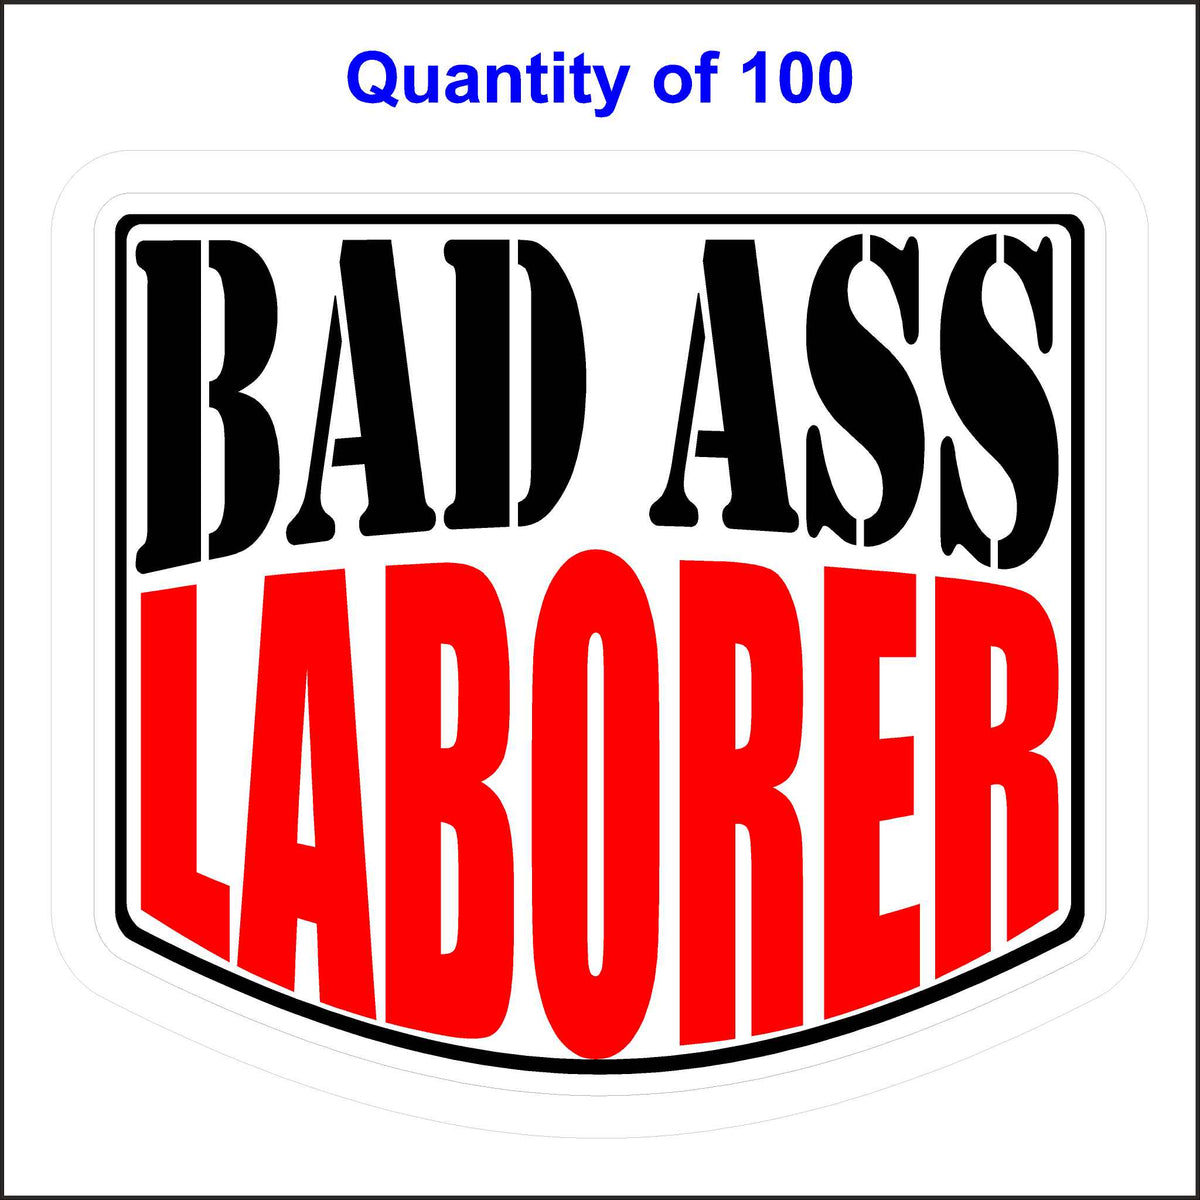 Bad Ass Laborer Stickers 100 Quantity.